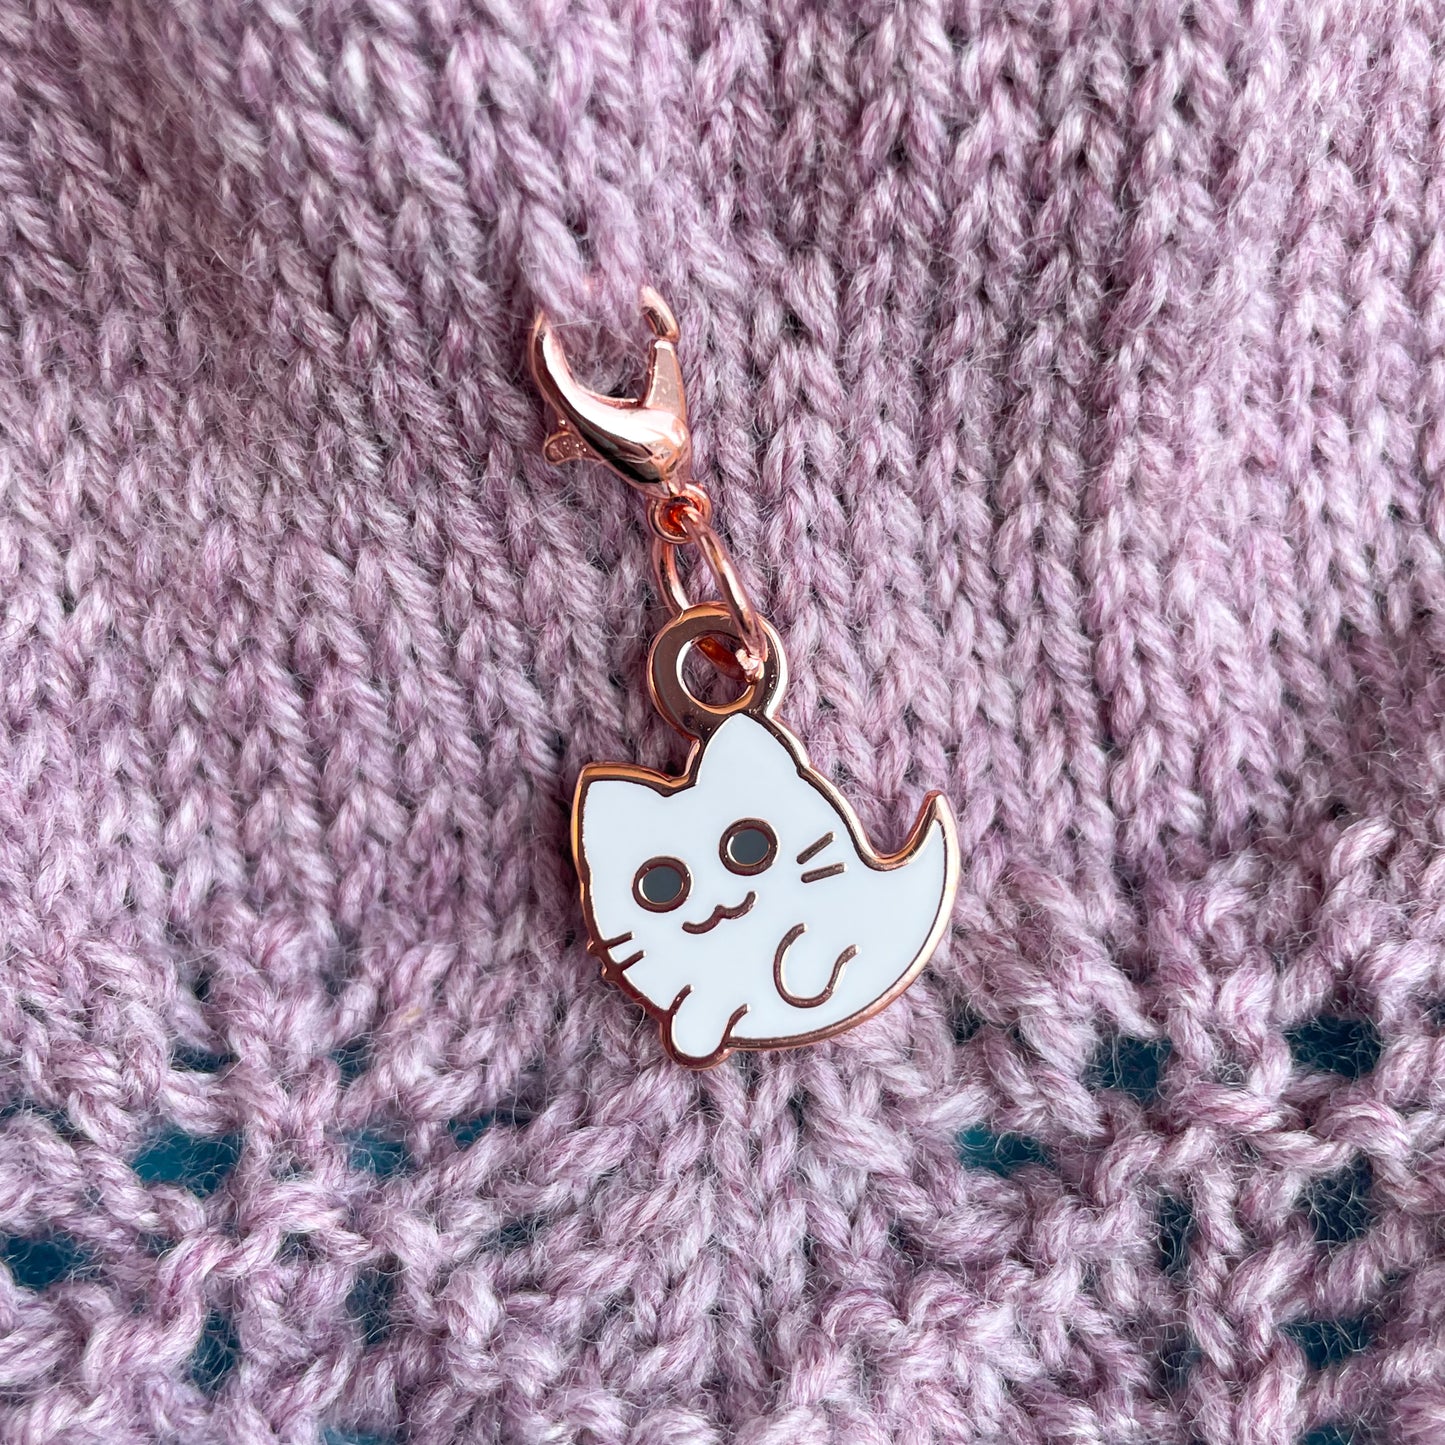 A kitty ghost charm attached to a piece of knitting that is mauve stockinette stitch going into lace. 